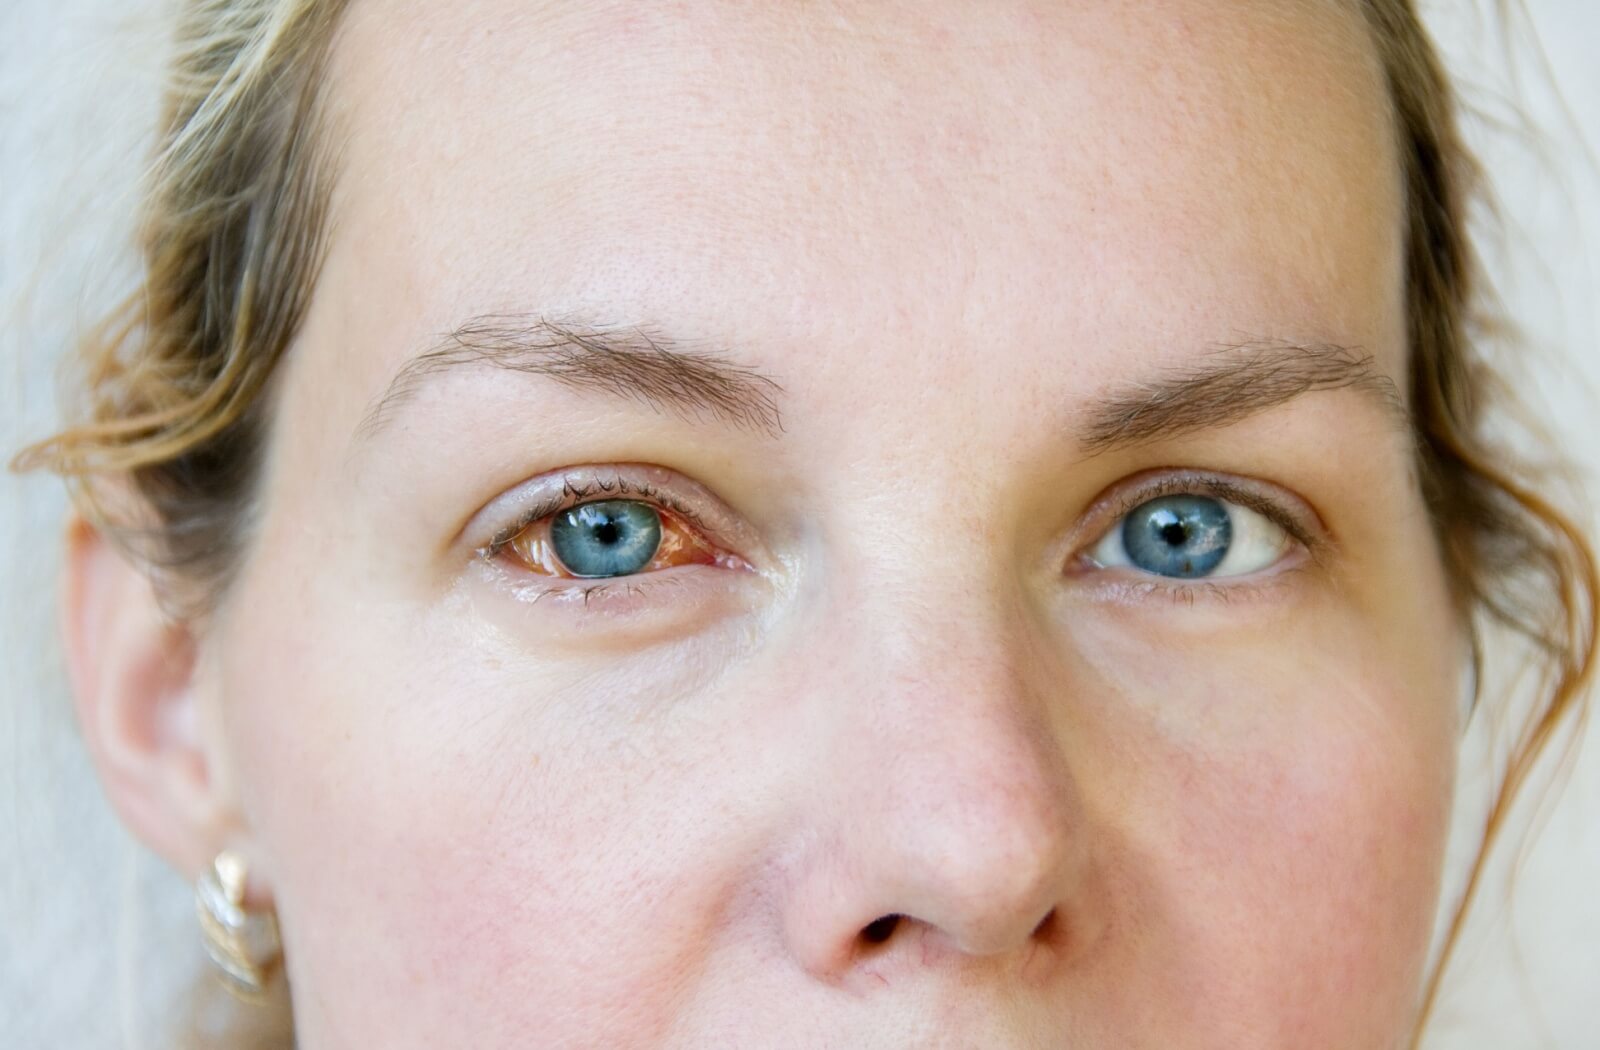 A woman with a watery right eye which is a symptom of glaucoma.